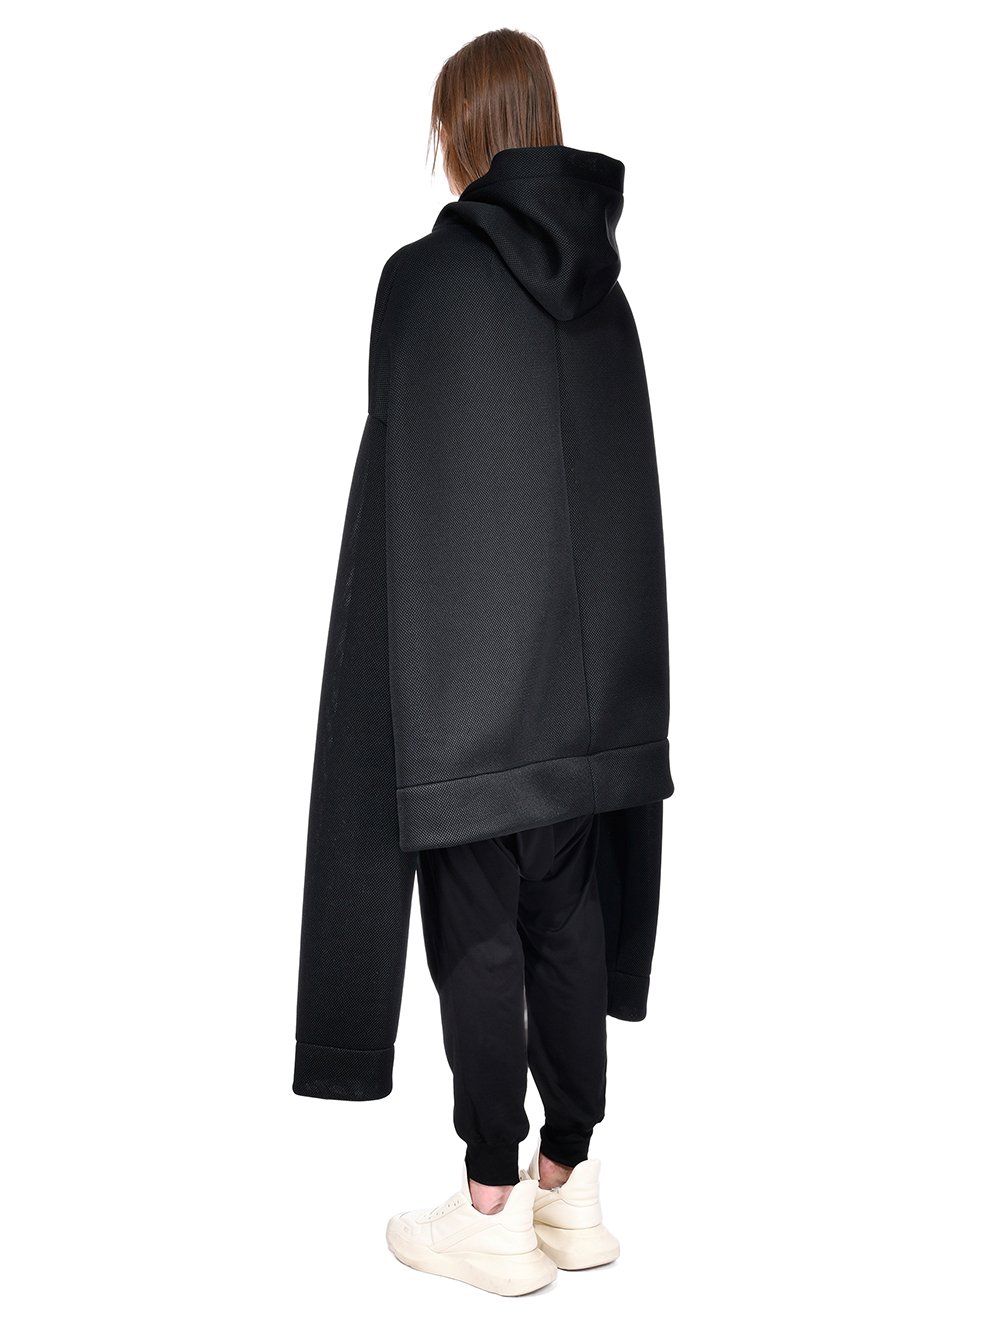 CHAMPION X RICK OWENS FLYPROOF TUNIC IN BLACK RECYCLED 3D MESH